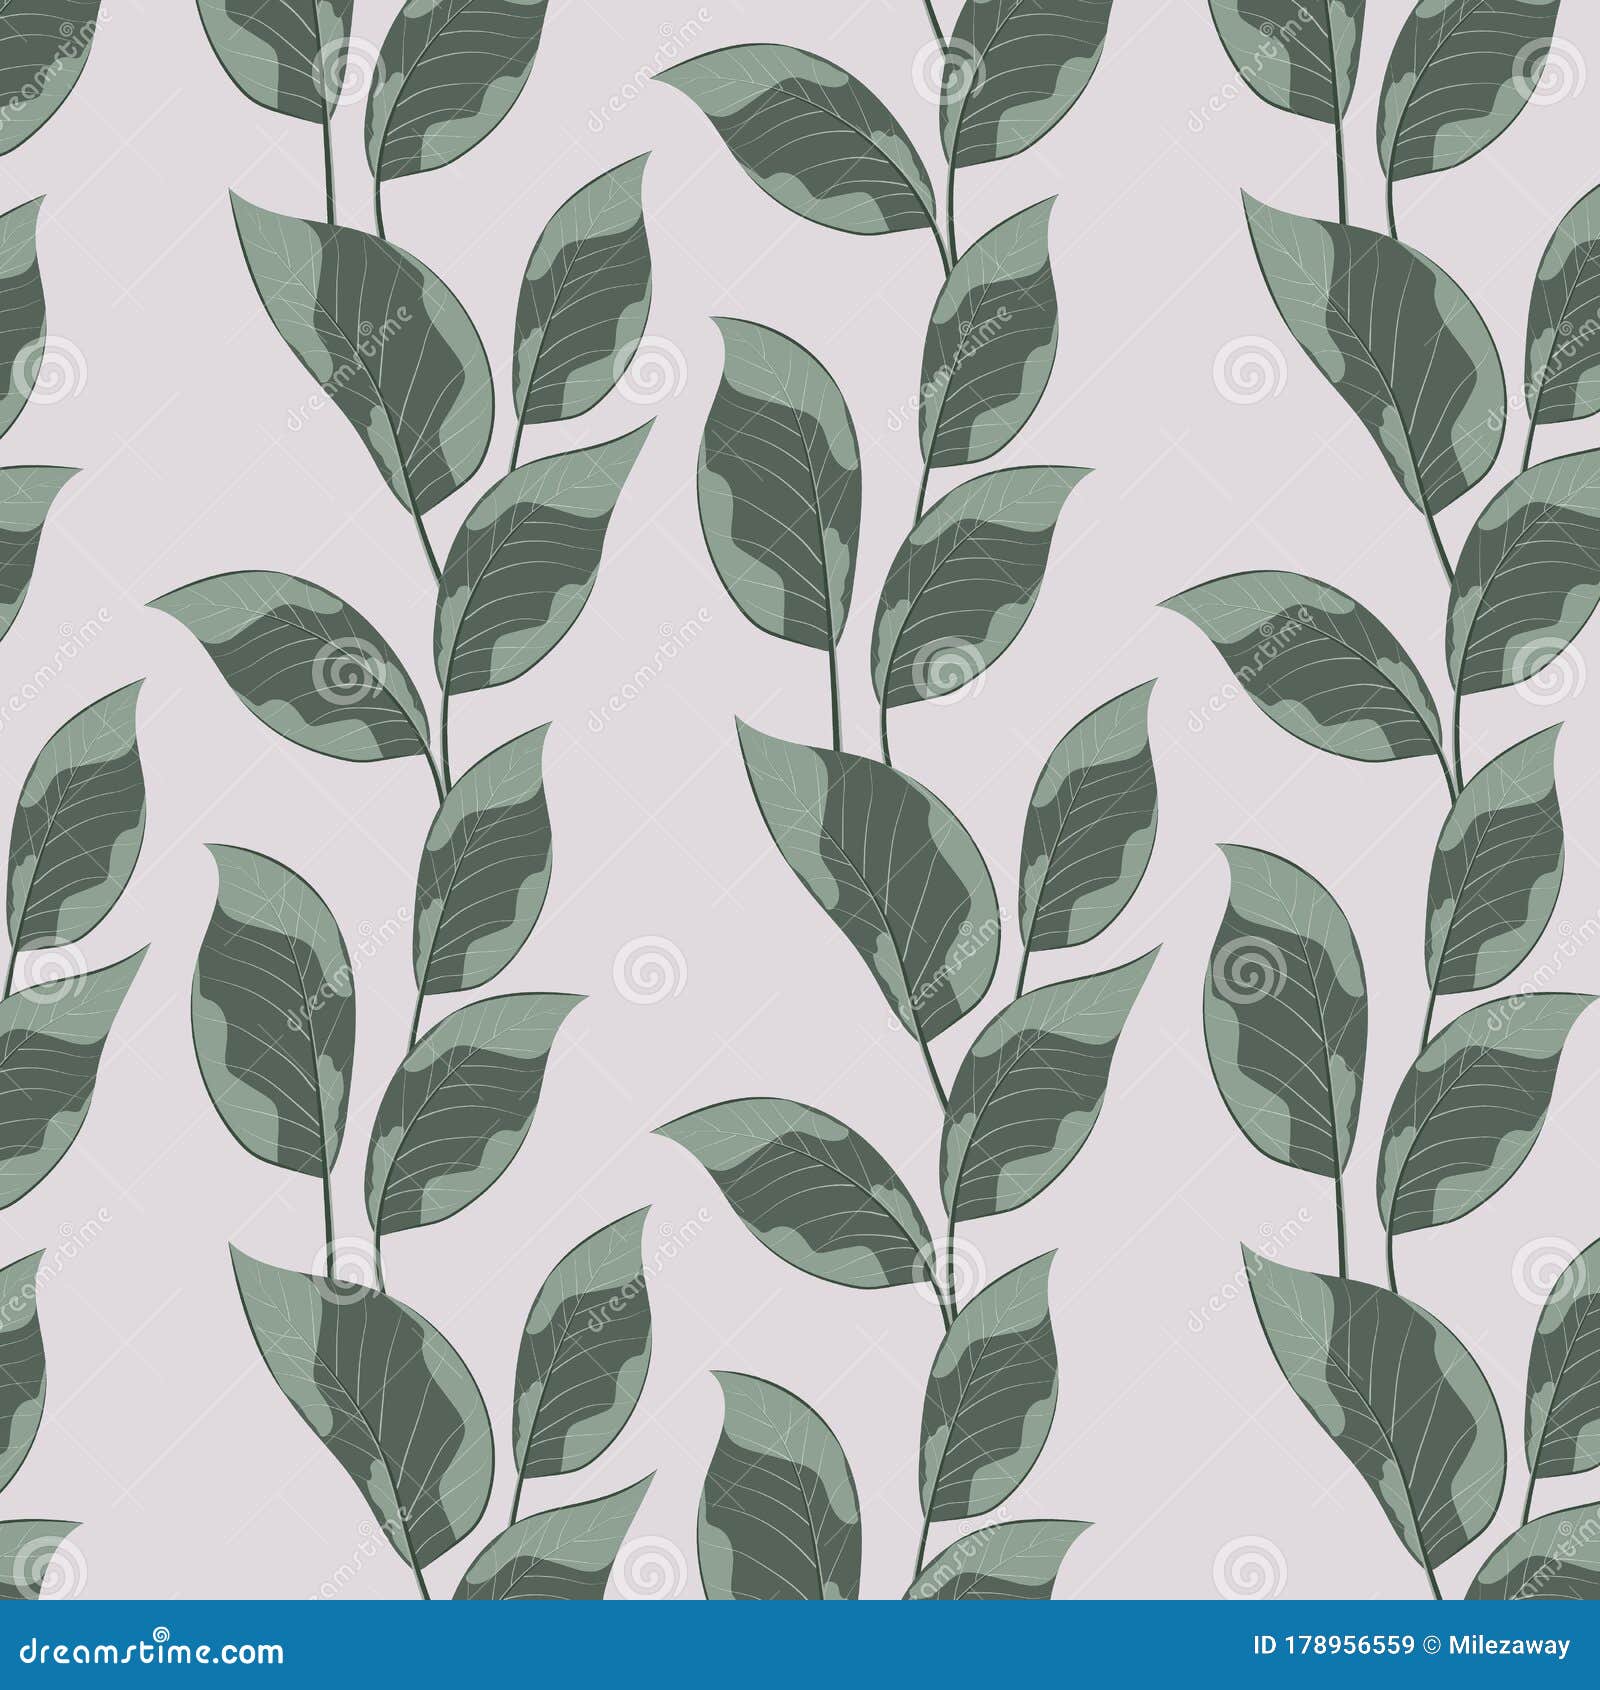 Hand Drawn Vector Pattern, Repeating Abstract Leaf Vine, Garland Styles